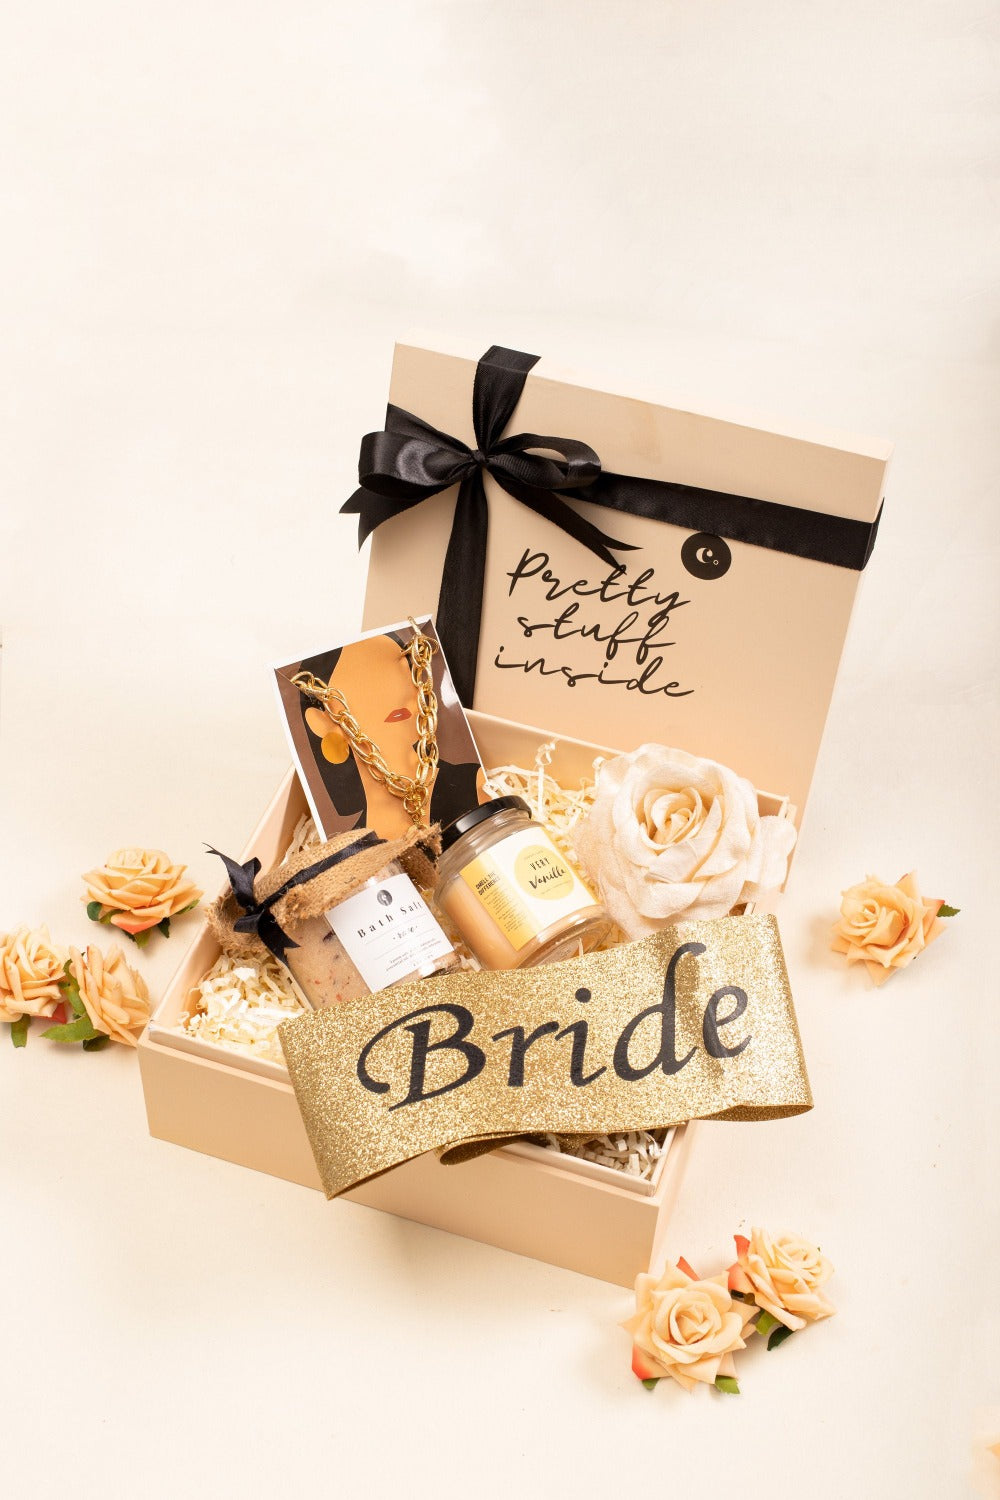 Wedding Return Gifts - Buy Marriage Return Gifts Online | The One Shop